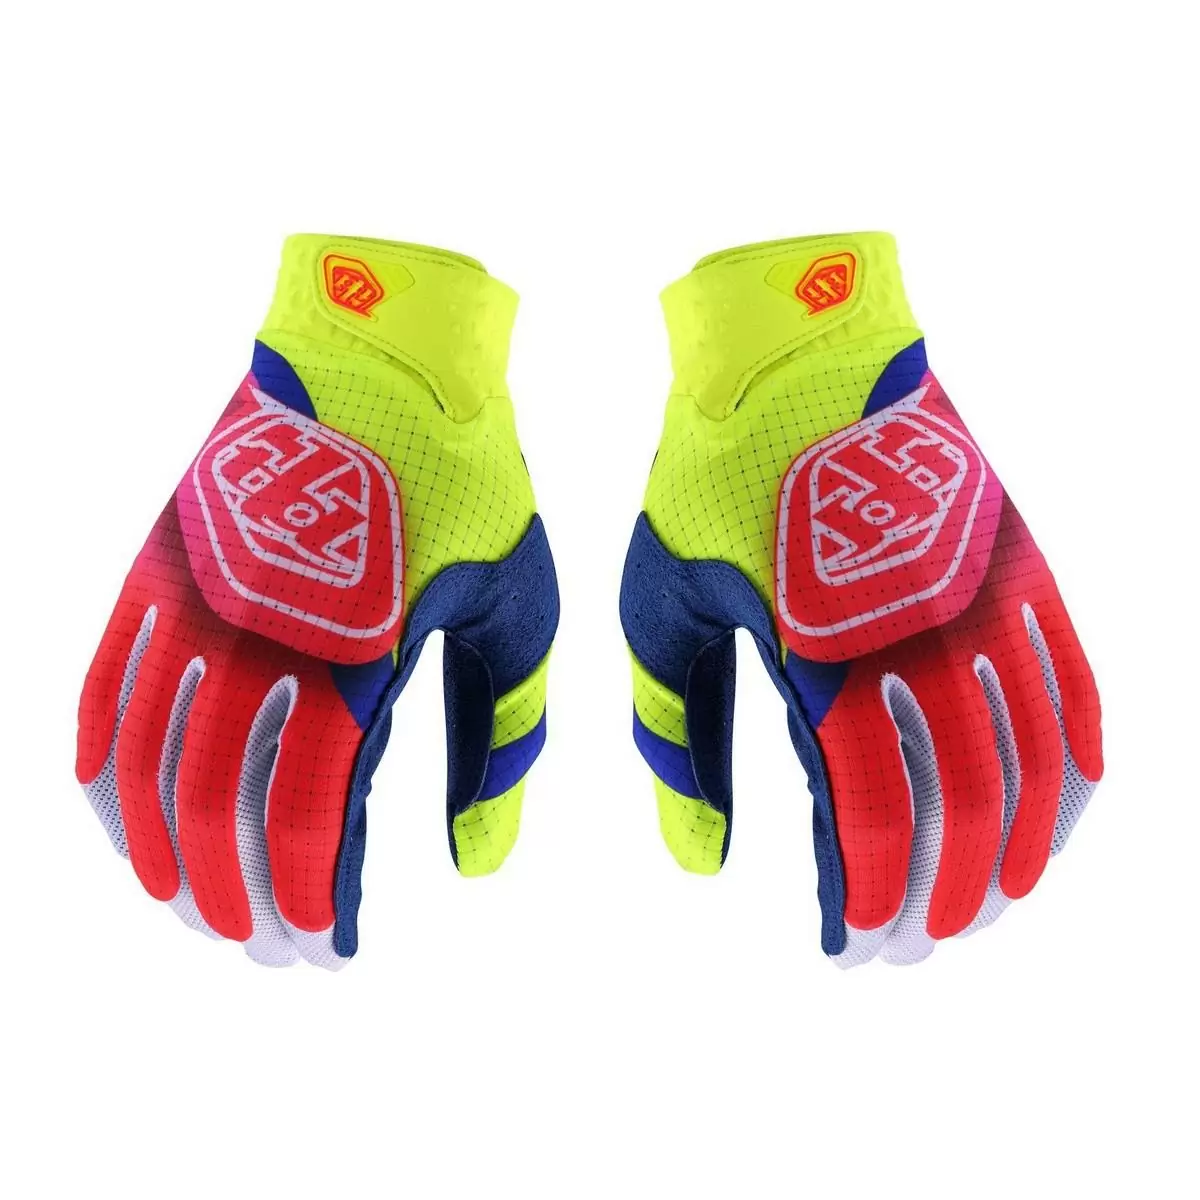 MTB Gloves Air Glove Radian Multicolored Size S - image